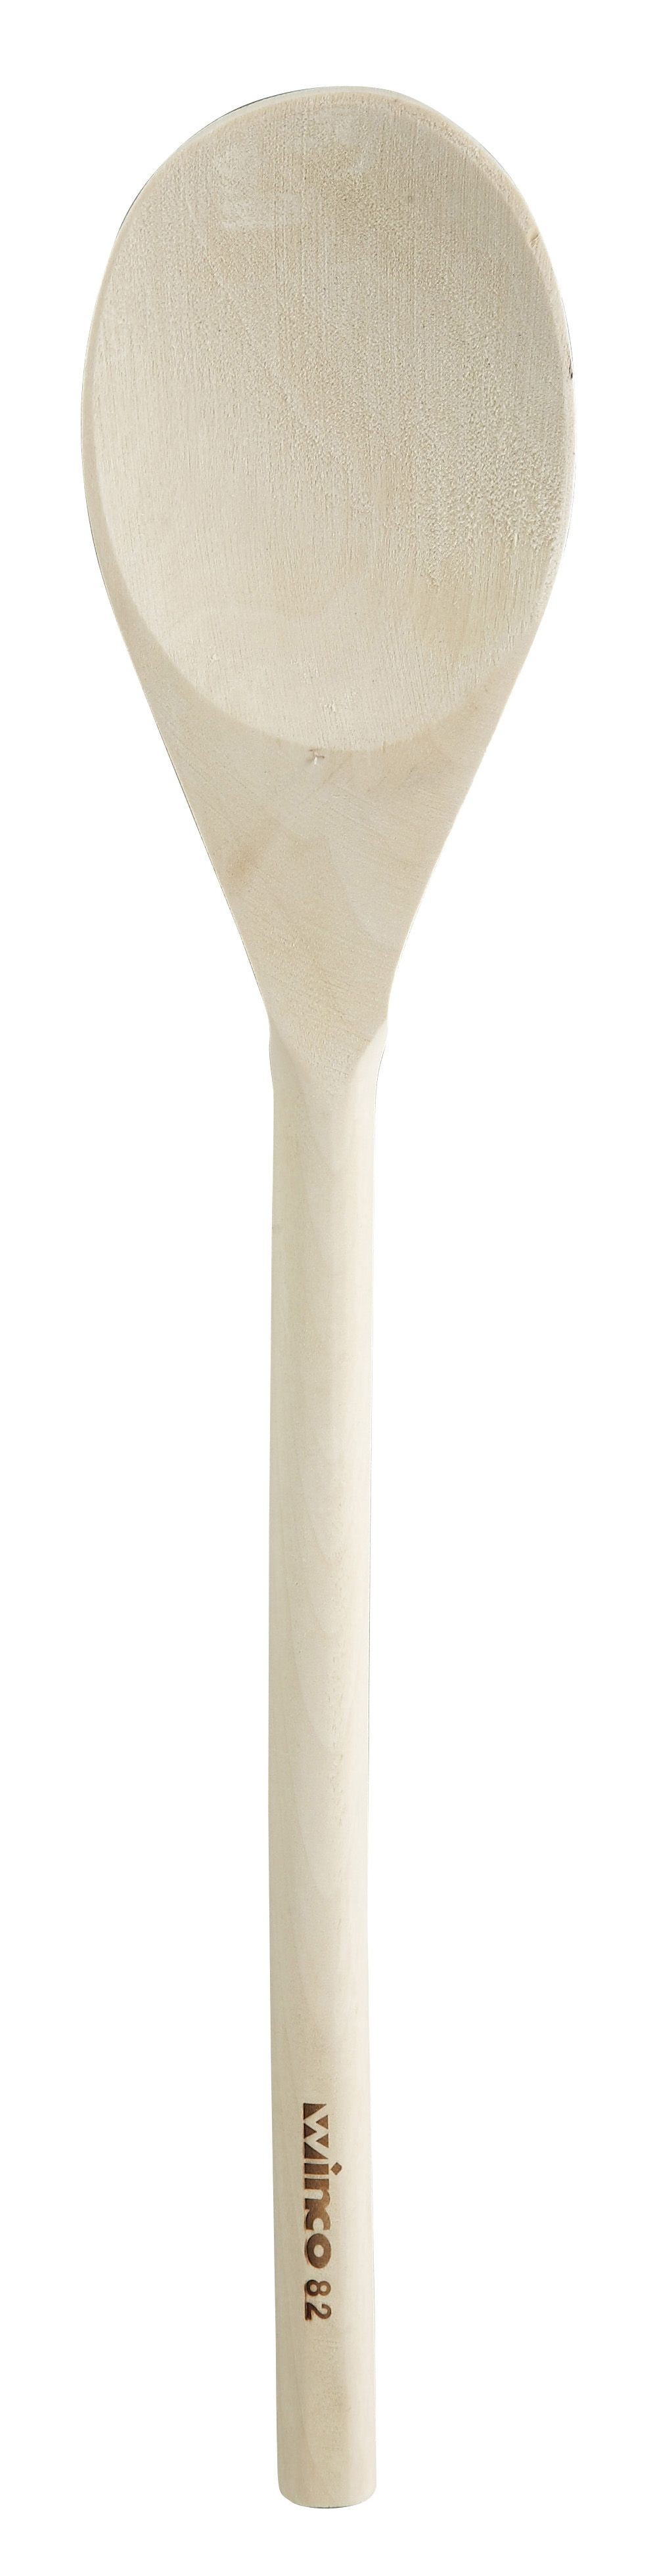 Winco WWP-12 Natural Finish Wooden Spoon 12"